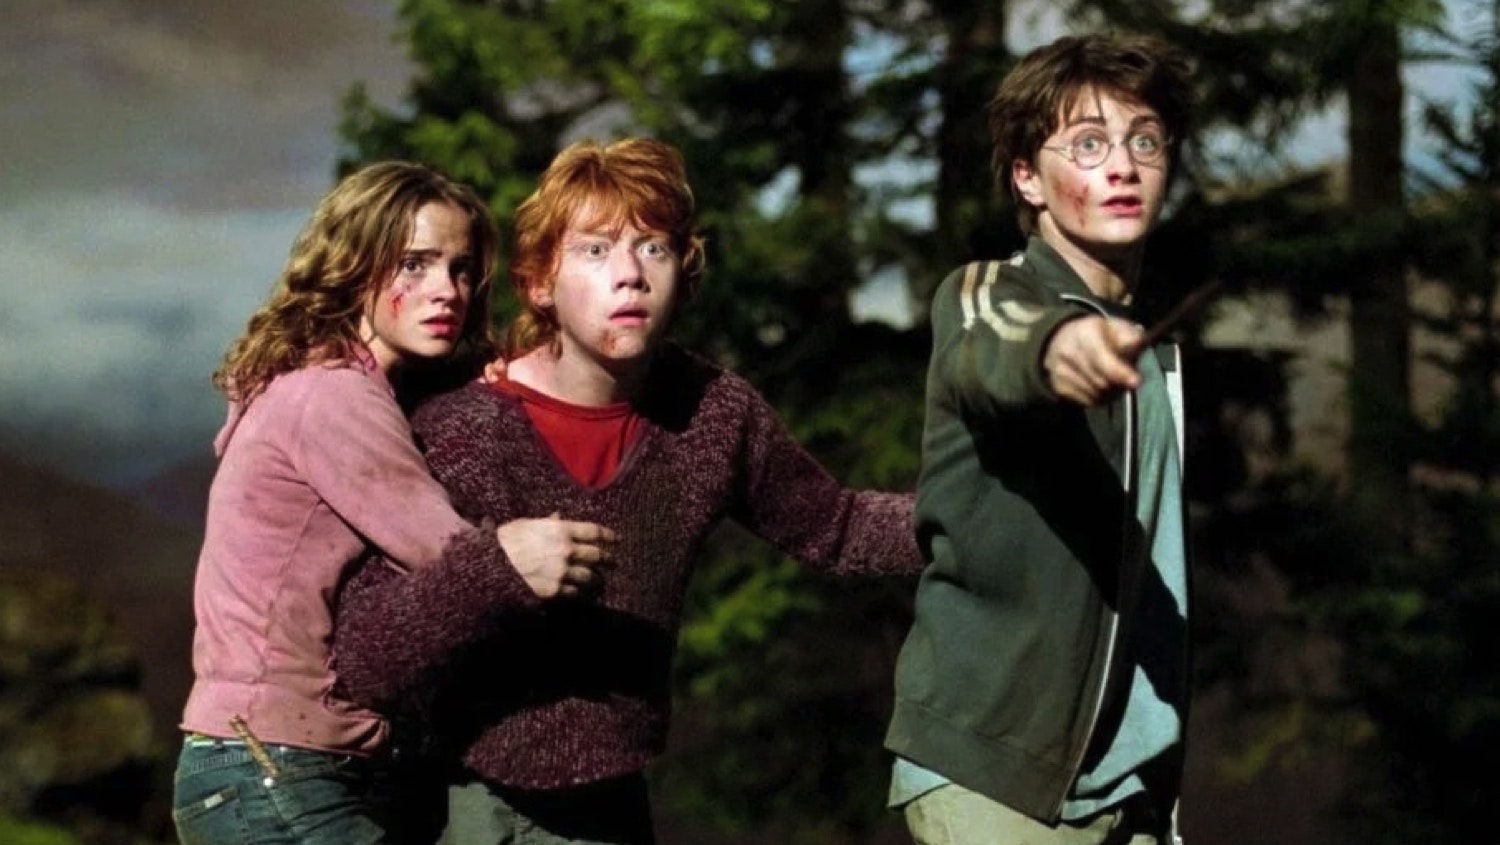 Harry Potter TV series: Everything we know about the Max Original show